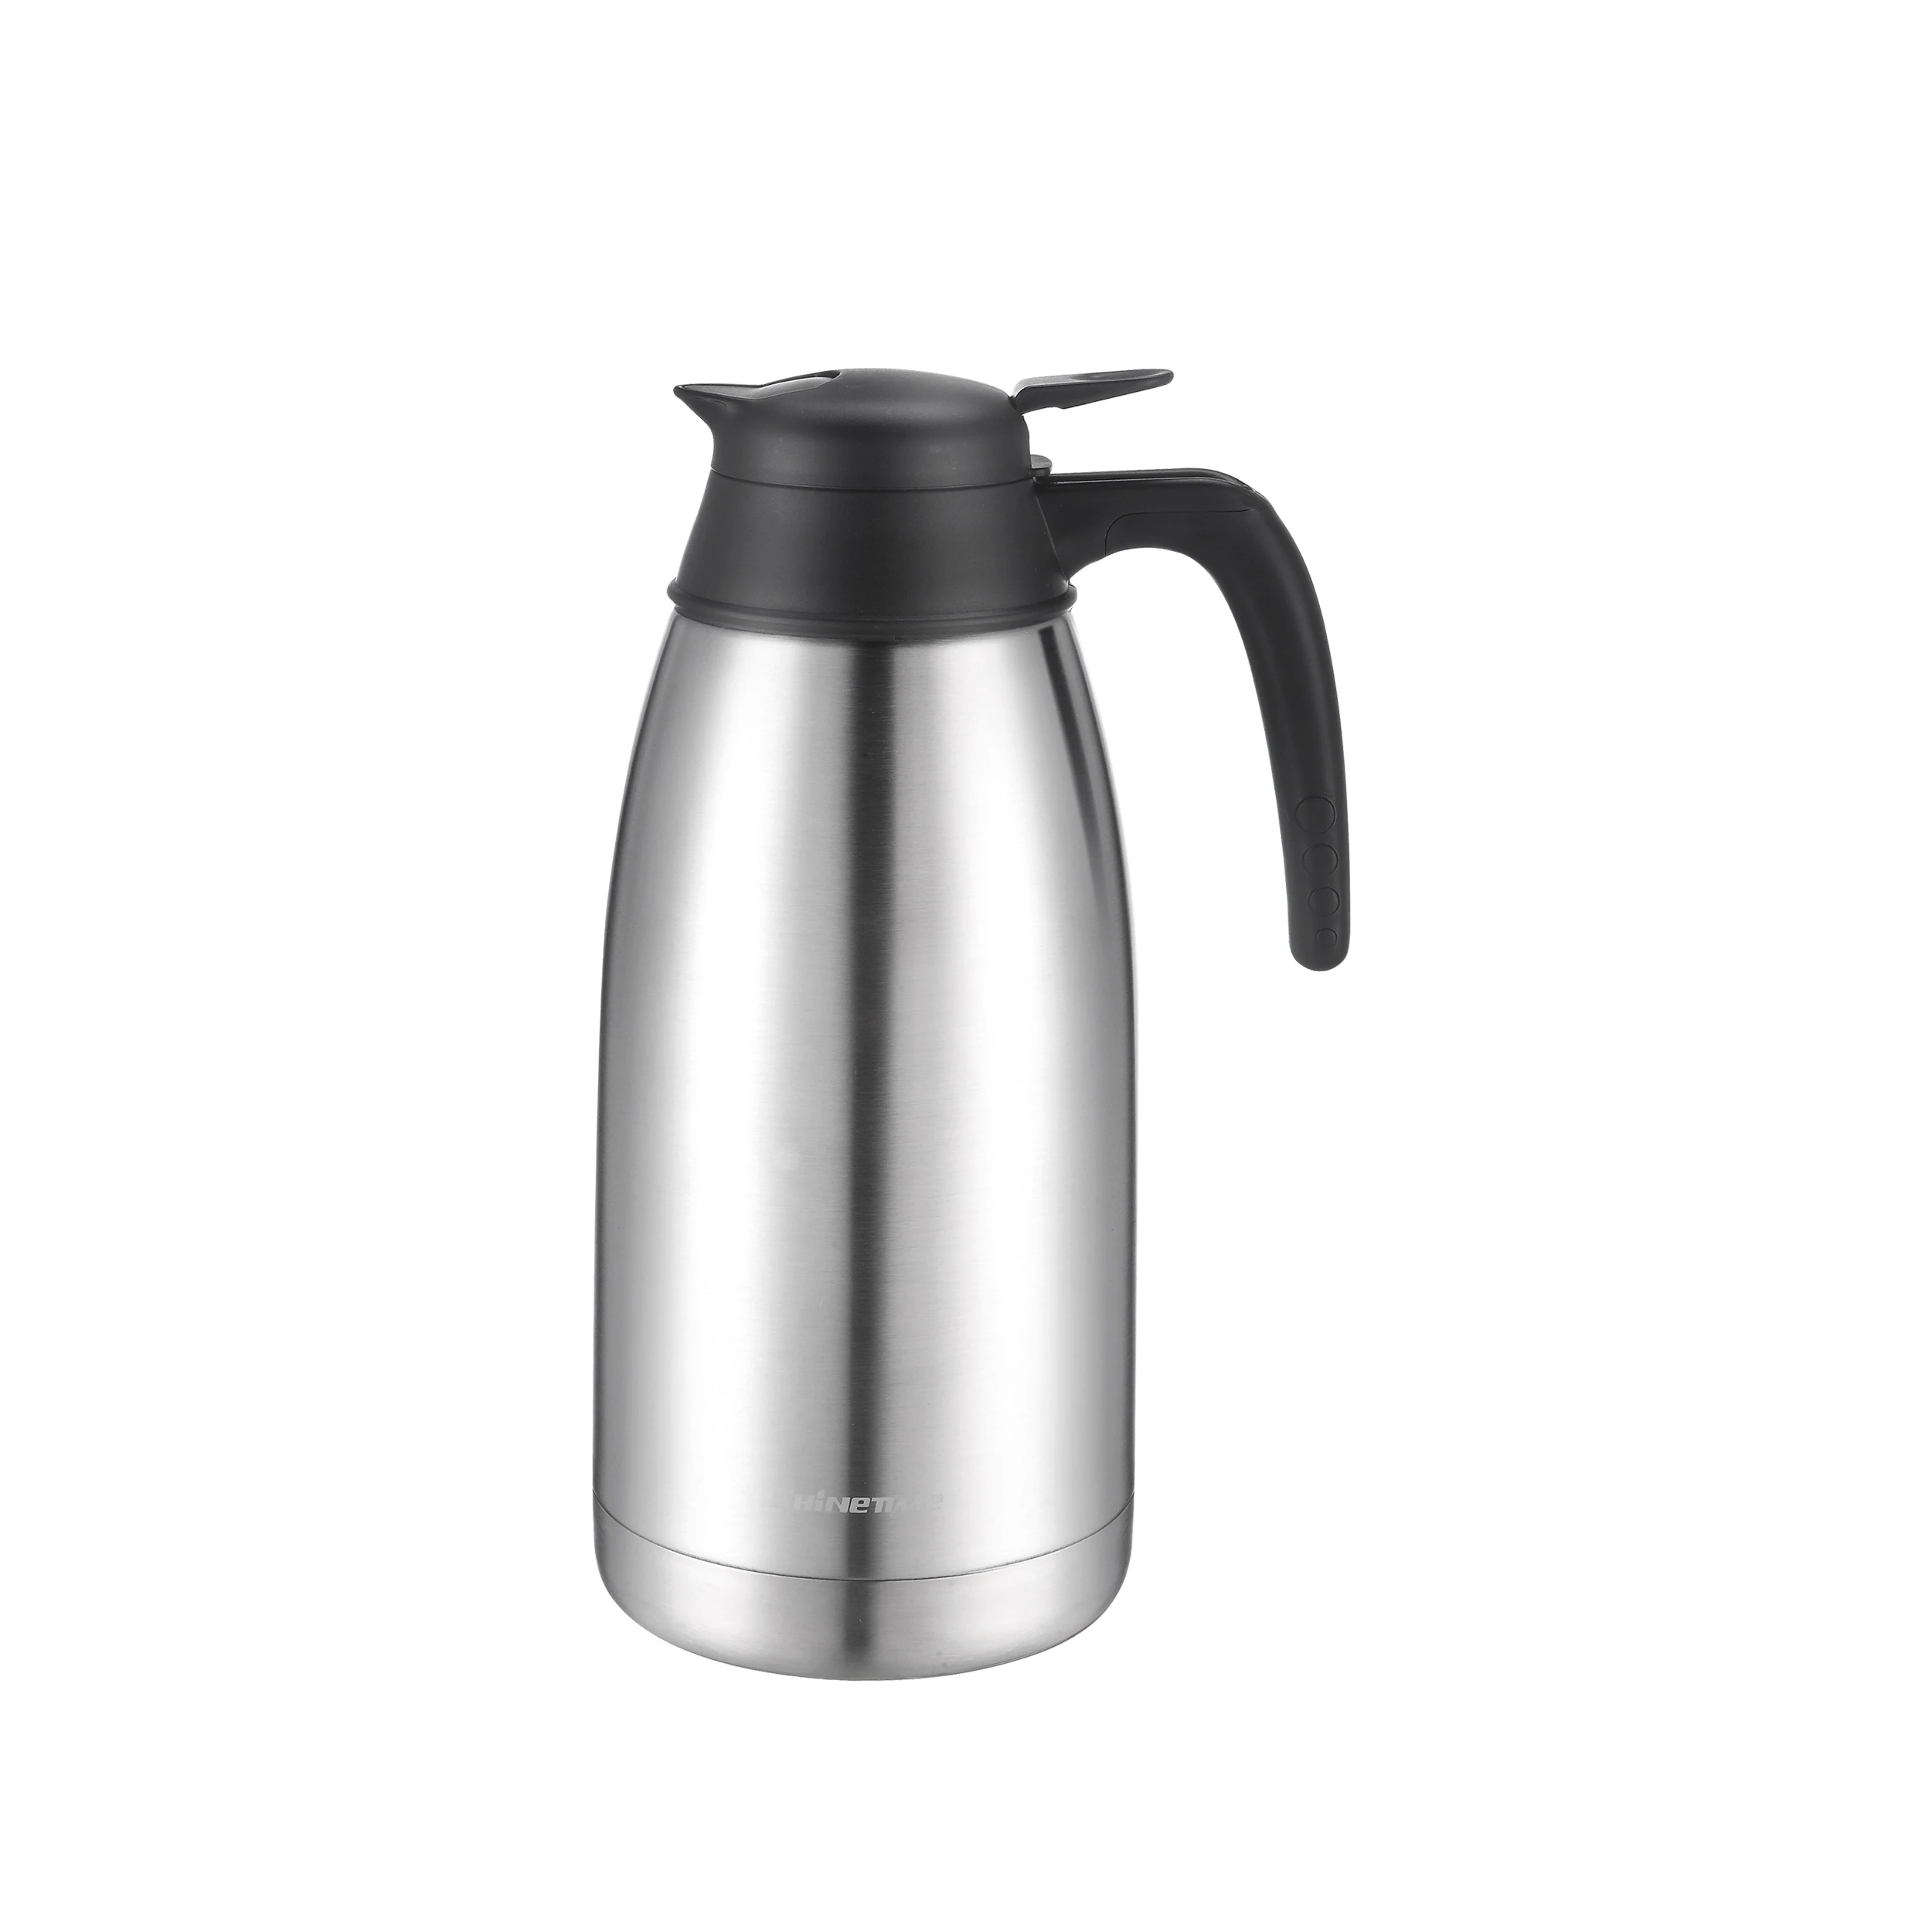 
Top selling 304 stainless steel insulated water pot insulated water kettles 